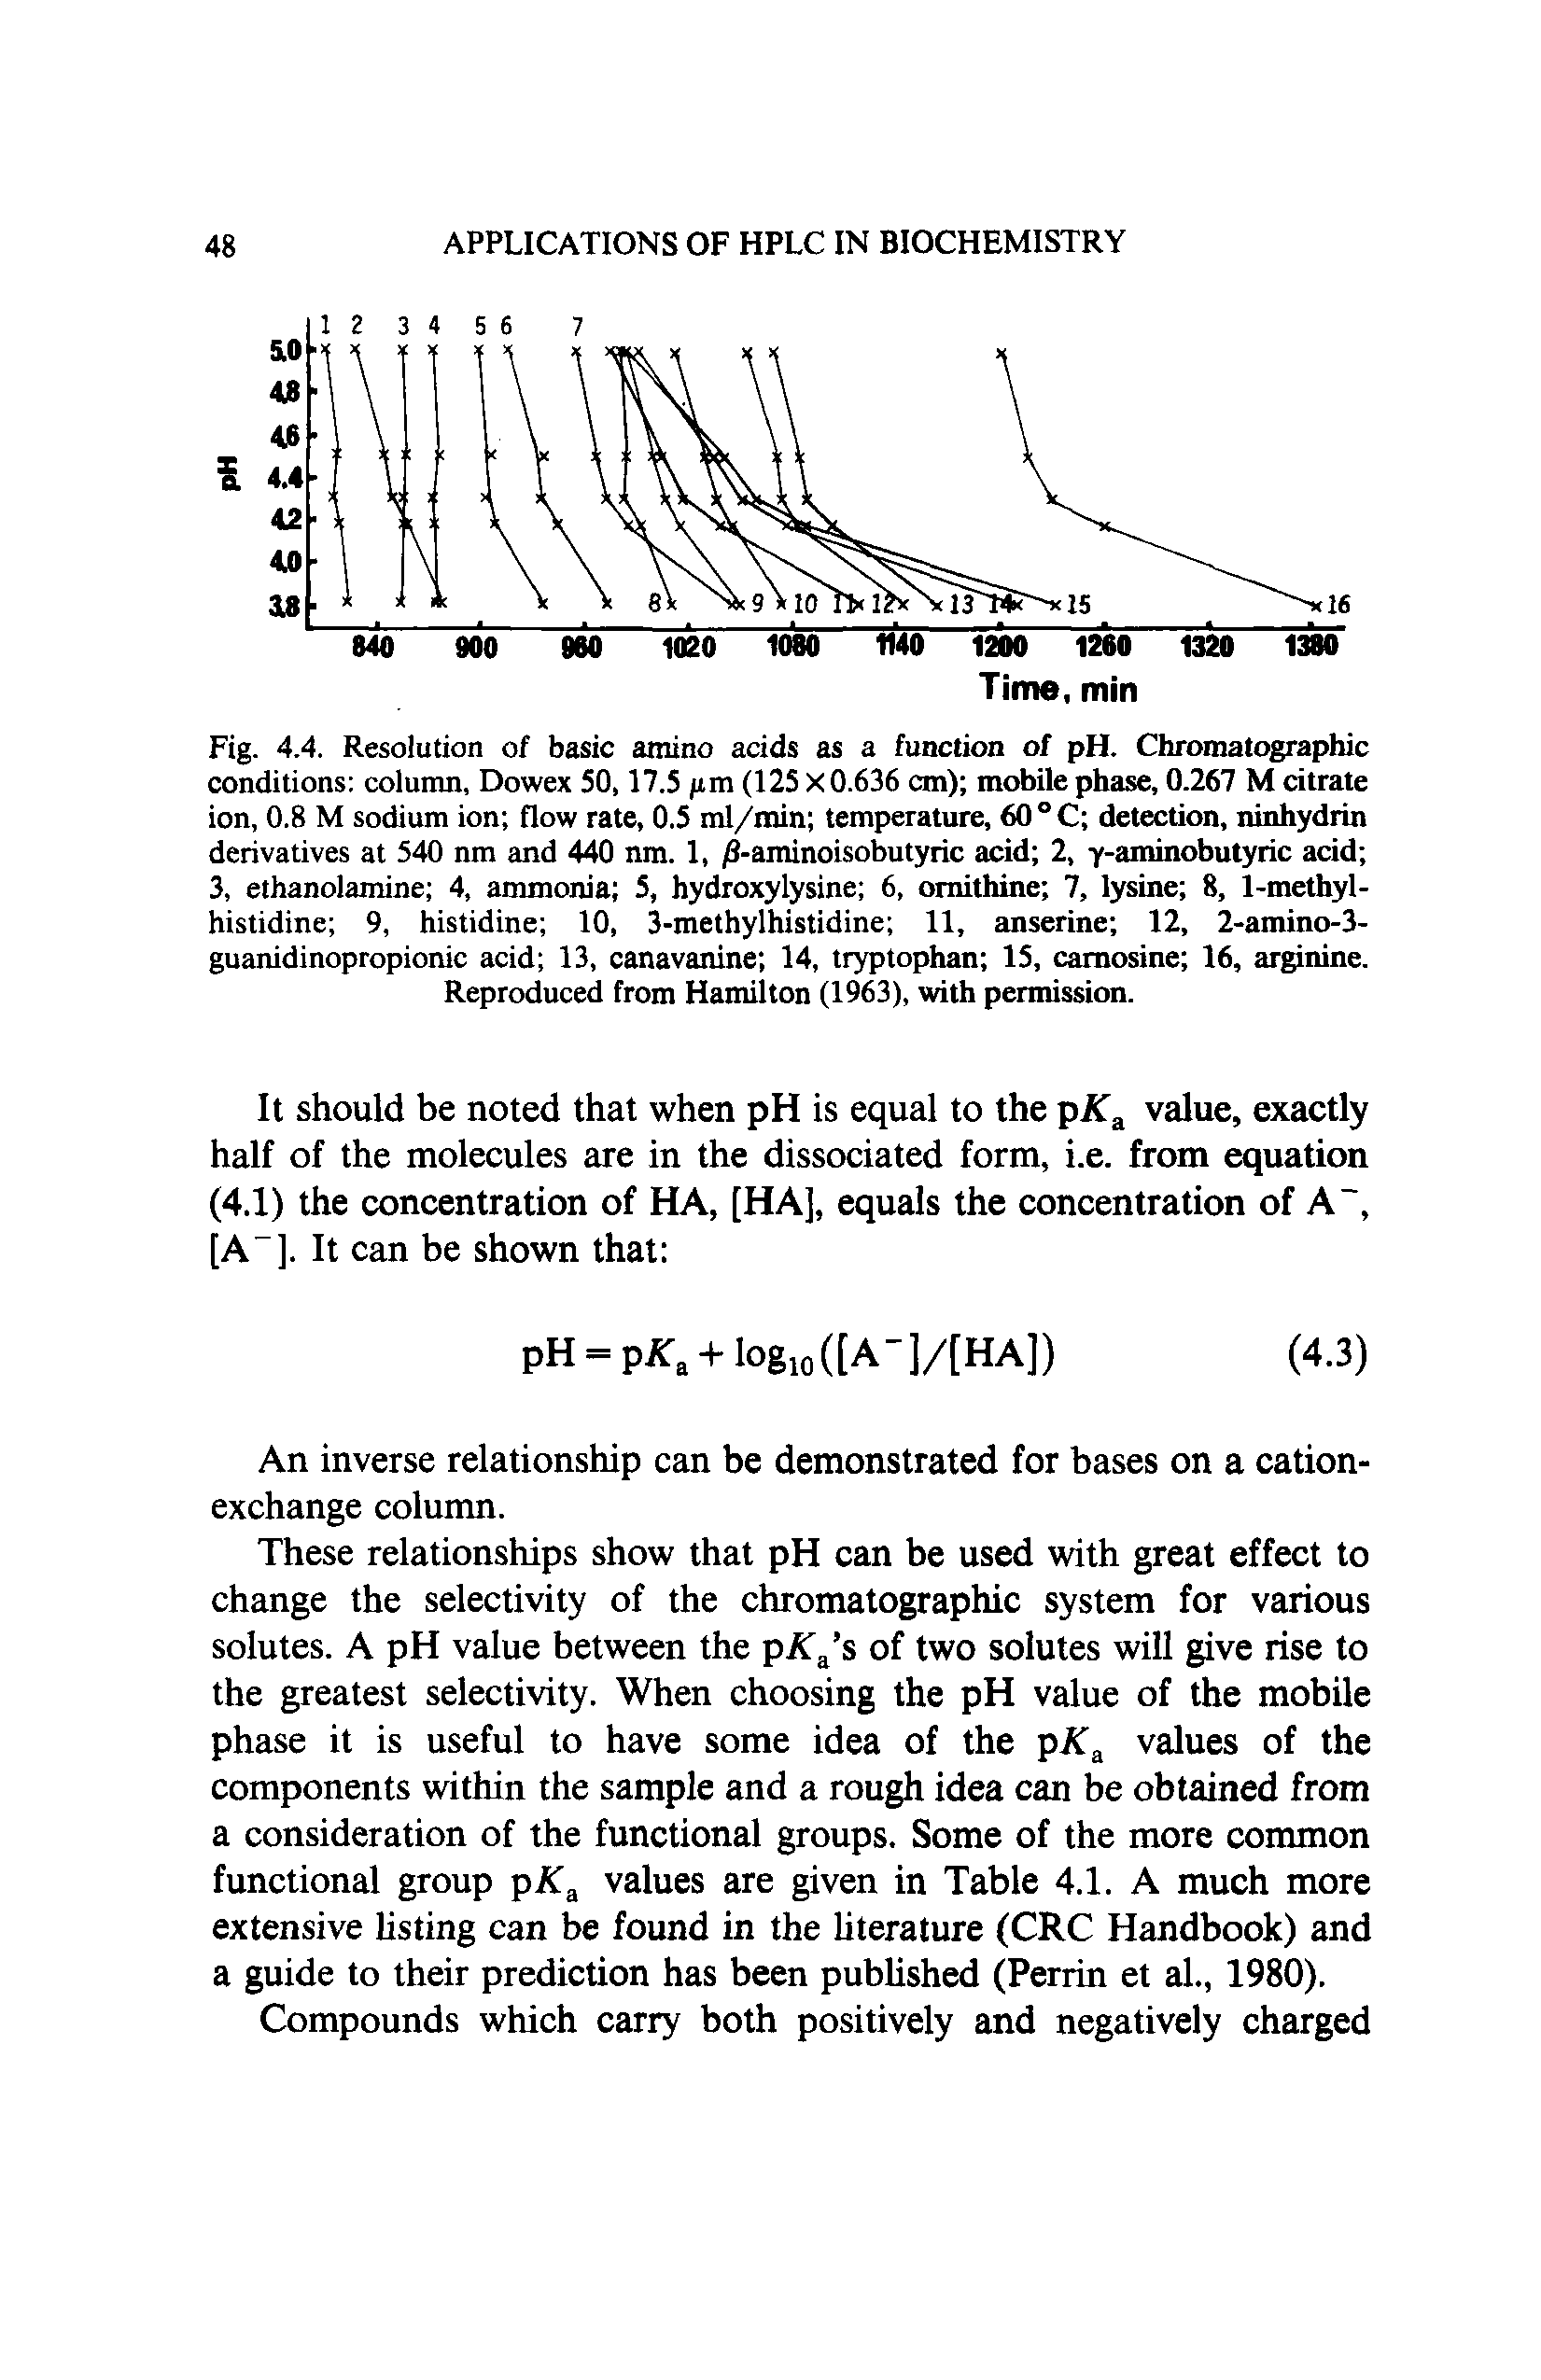 Fig. 4.4. Resolution of basic amino acids as a function of pH. Chromatographic conditions column, Dowex 50,17.5 jim (125 X 0.636 cm) mobile phase, 0.267 M citrate ion, 0.8 M sodium ion flow rate, 0.5 ml/min temperature, 60 °C detection, ninhydrin derivatives at 540 nm and 440 nm. 1, jS-aminoisobutyric acid 2, y-aminobutyric acid 3, ethanolamine 4, ammonia 5, hydroxylysine 6, ornithine 7, lysine 8, 1-methyl-histidine 9, histidine 10, 3-methylhistidine 11, anserine 12, 2-amino-3-guanidinopropionic acid 13, canavanine 14, tryptophan 15, camosine 16, arginine. Reproduced from Hamilton (1963), with permission.